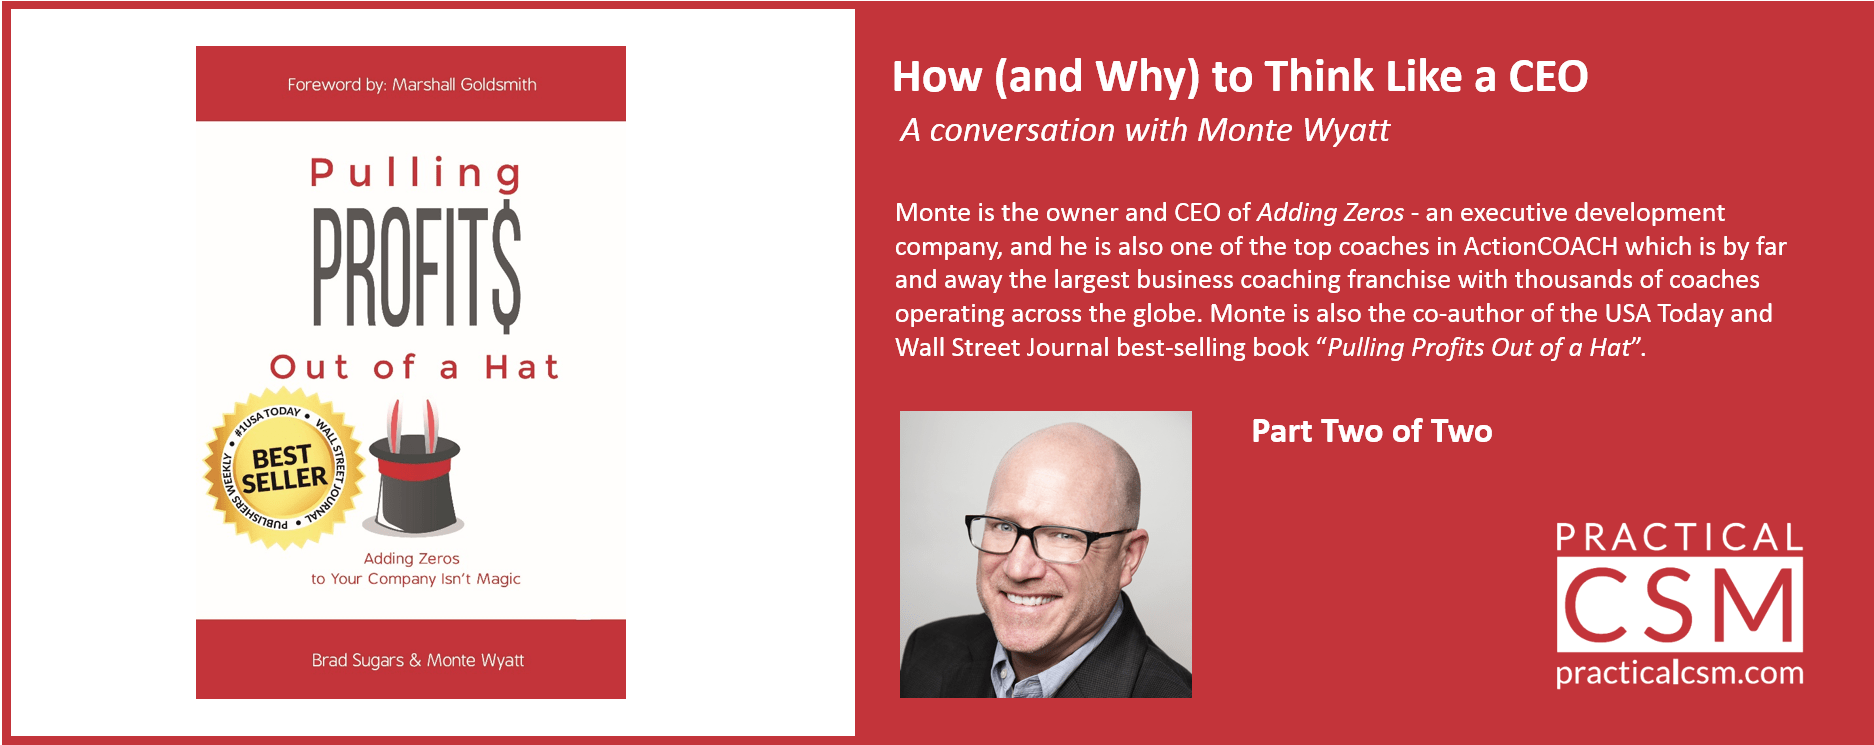 Practical CSM how and Why to think Like a CEO with Monte Wyatt part 2